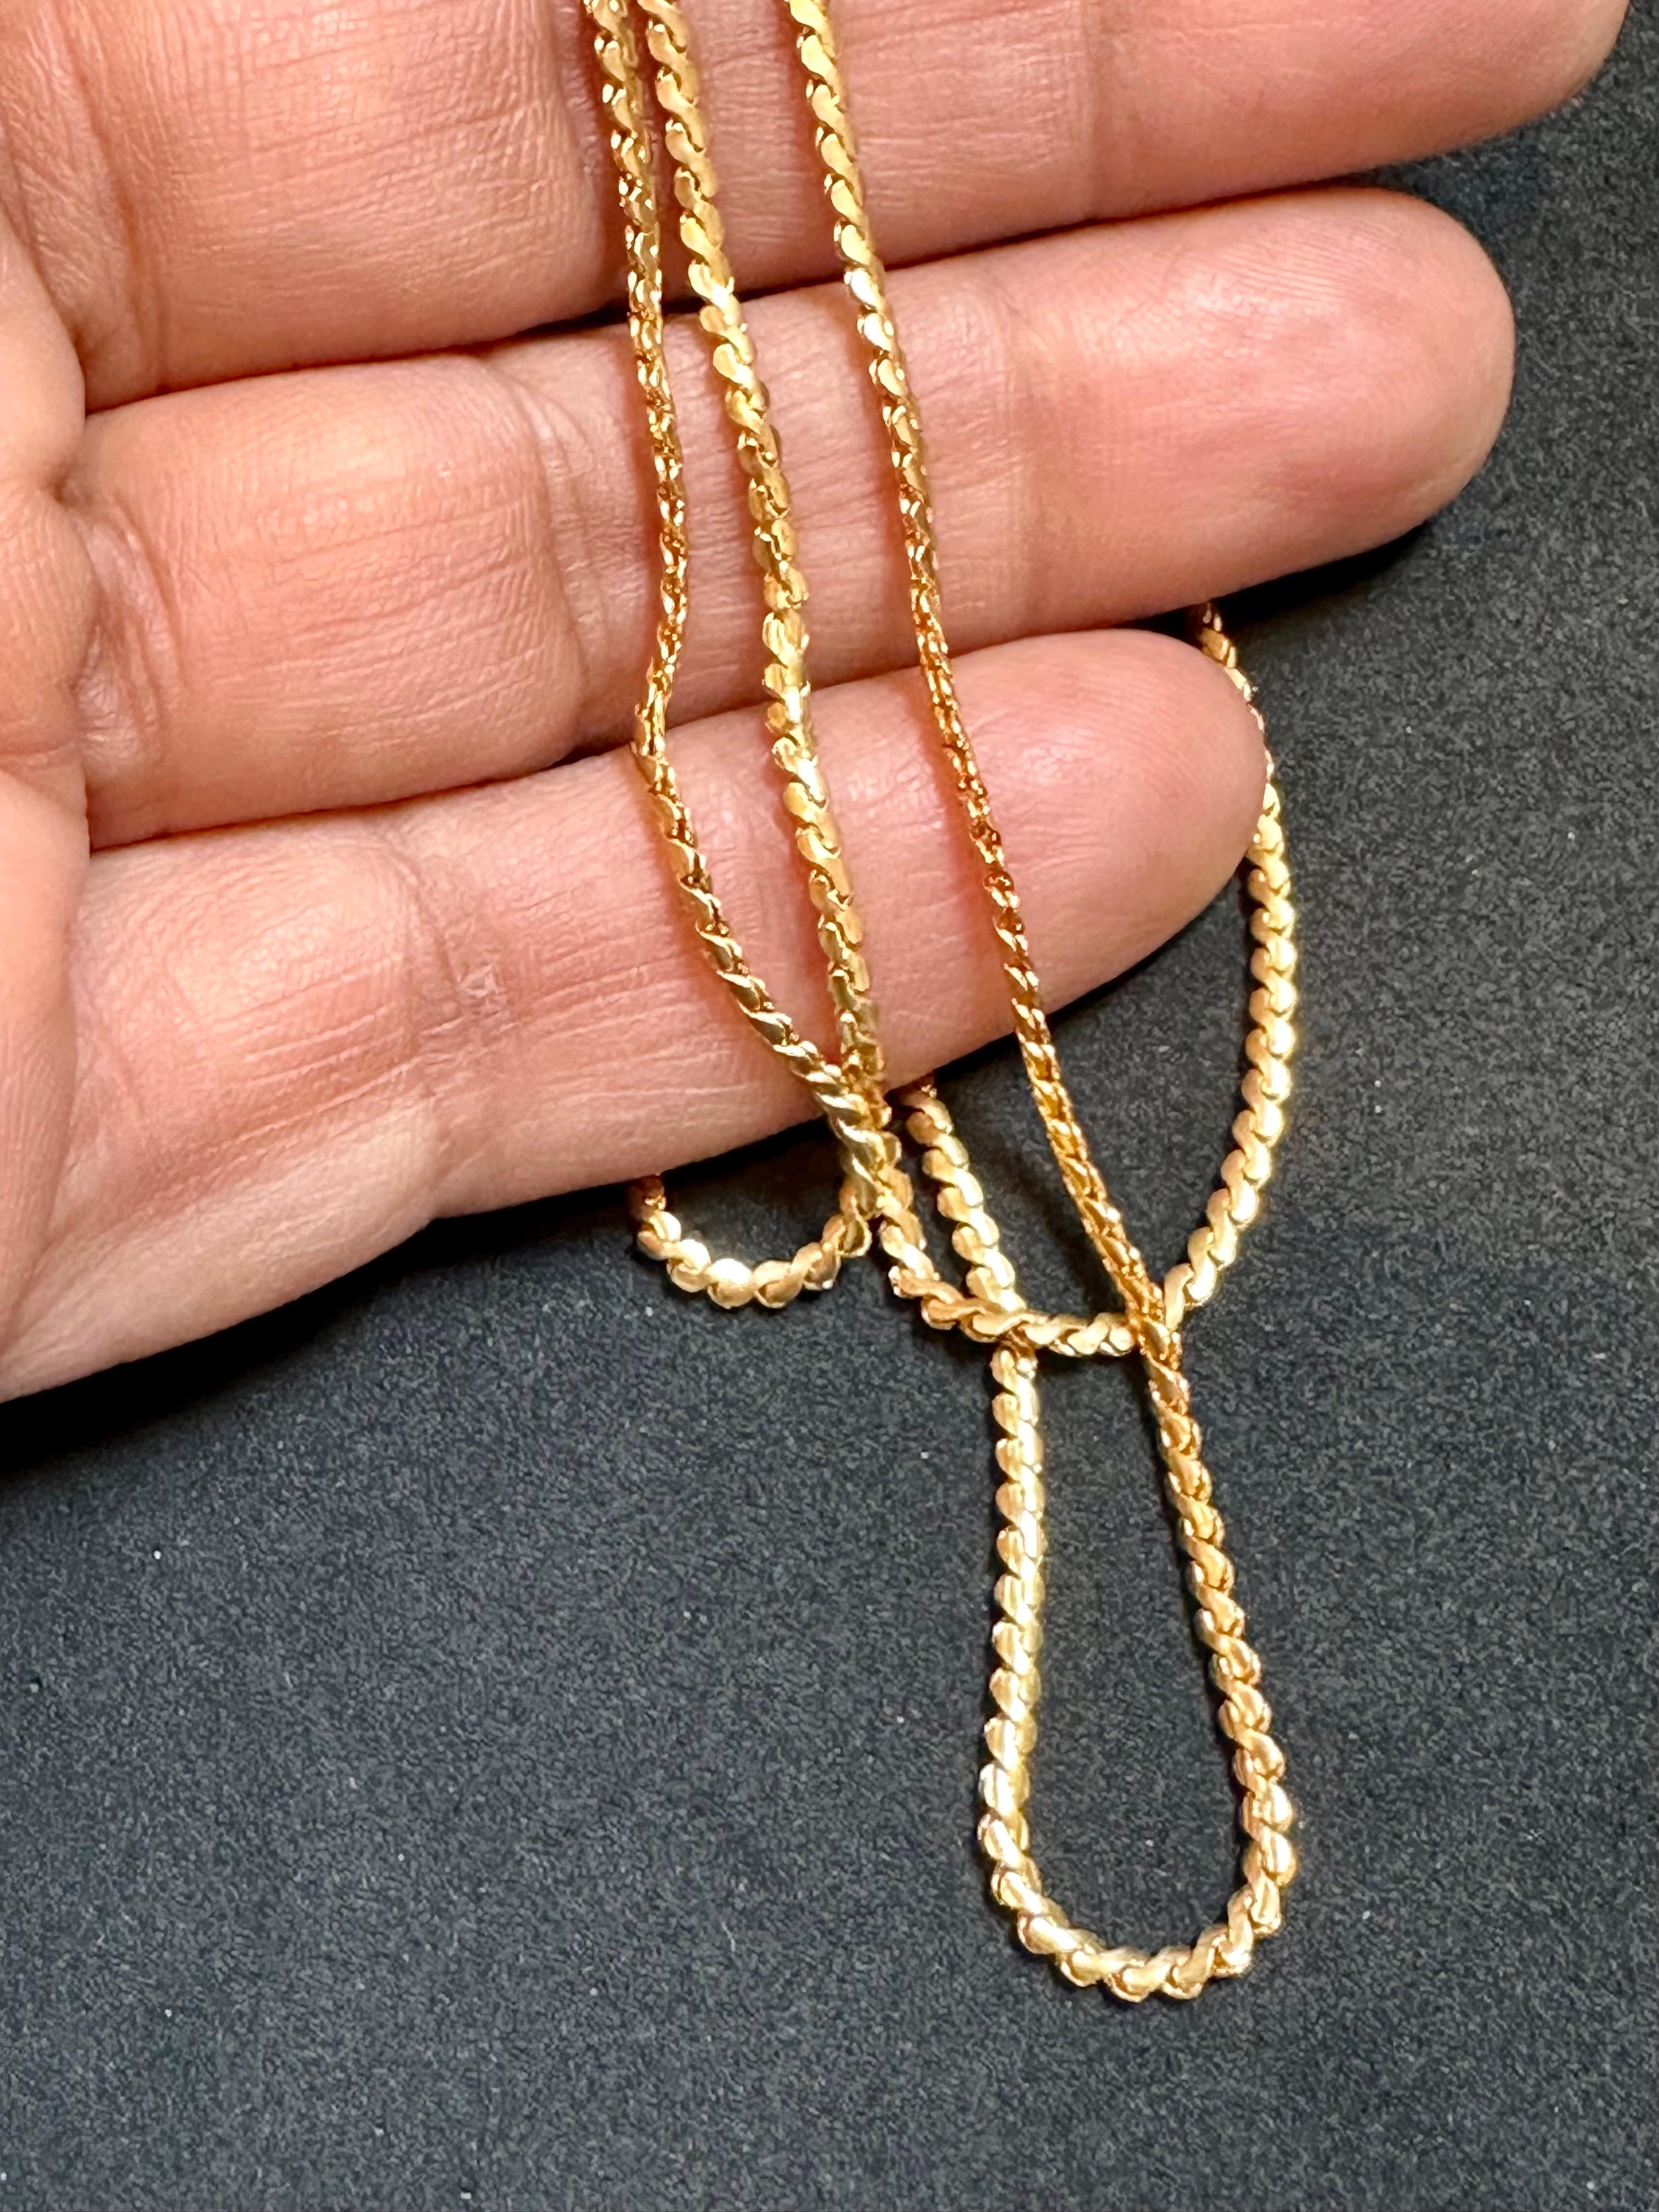 Vintage 18 Karat Yellow Gold 9.6 Gm S Link Chain Necklace For Sale 5